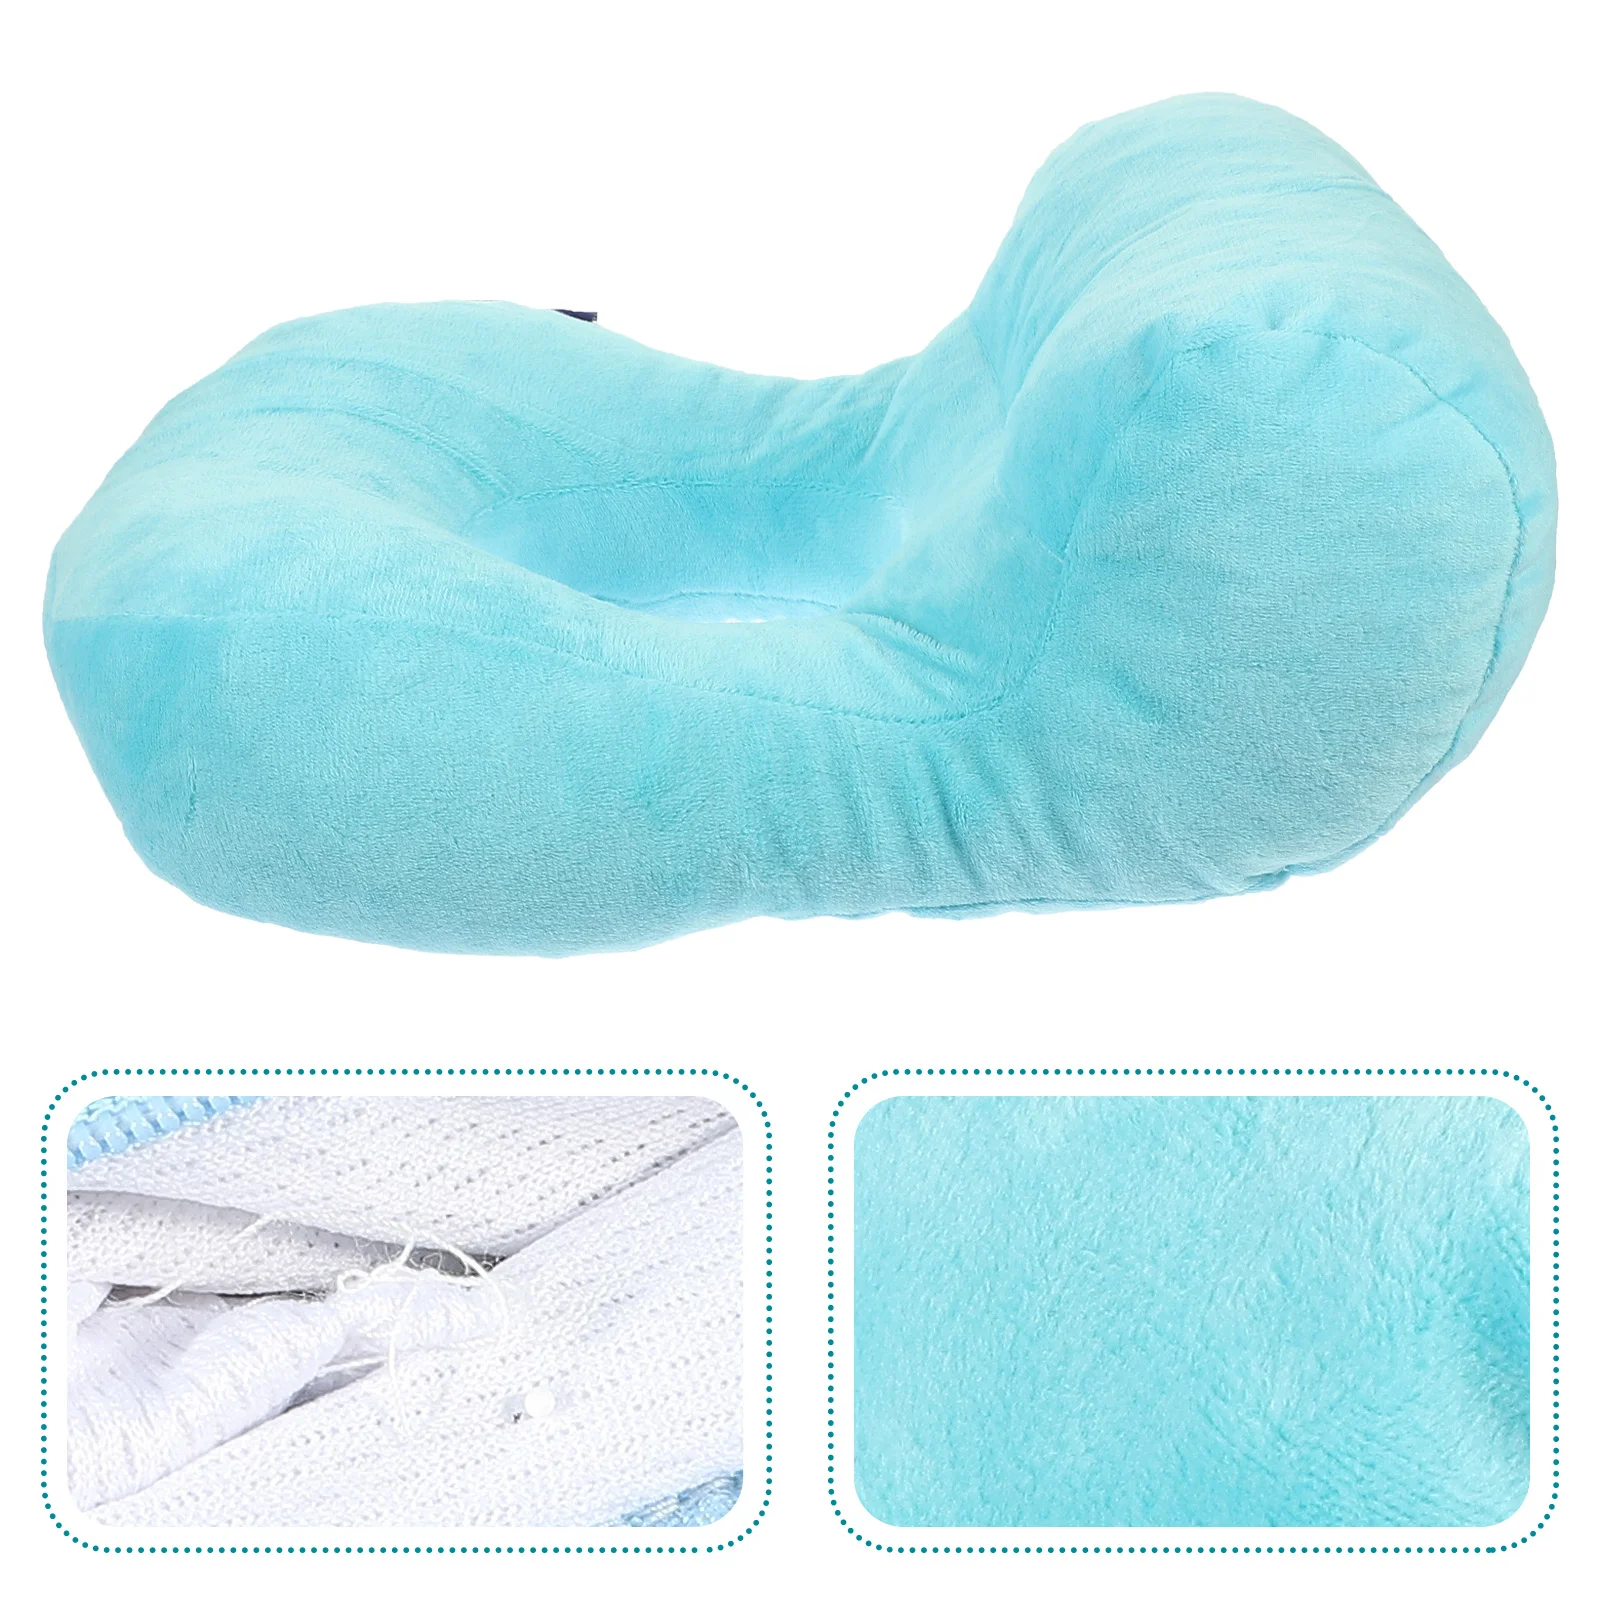 

Office Tummy Pillow School Nap Stuffed Desk Comfortable Resting Supple Home Travel Neck Pillows Airplanes Sleeping at work